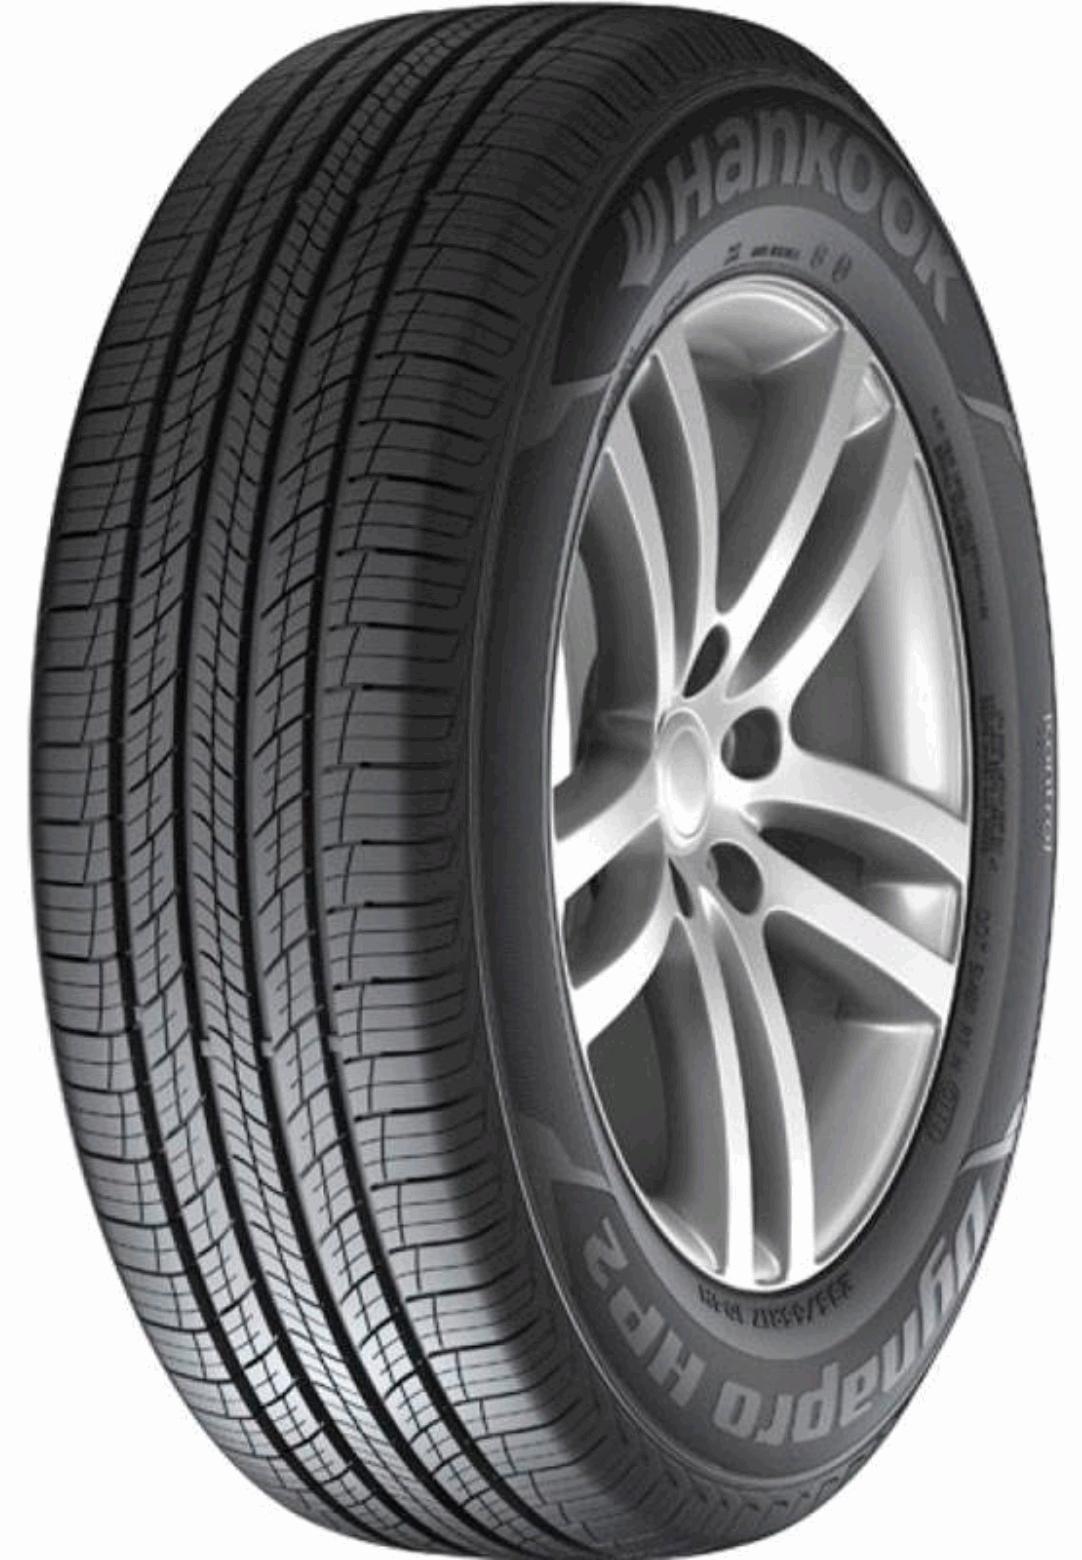 Hankook Dynapro HP2 RA33 - Reviews Tire and Tests